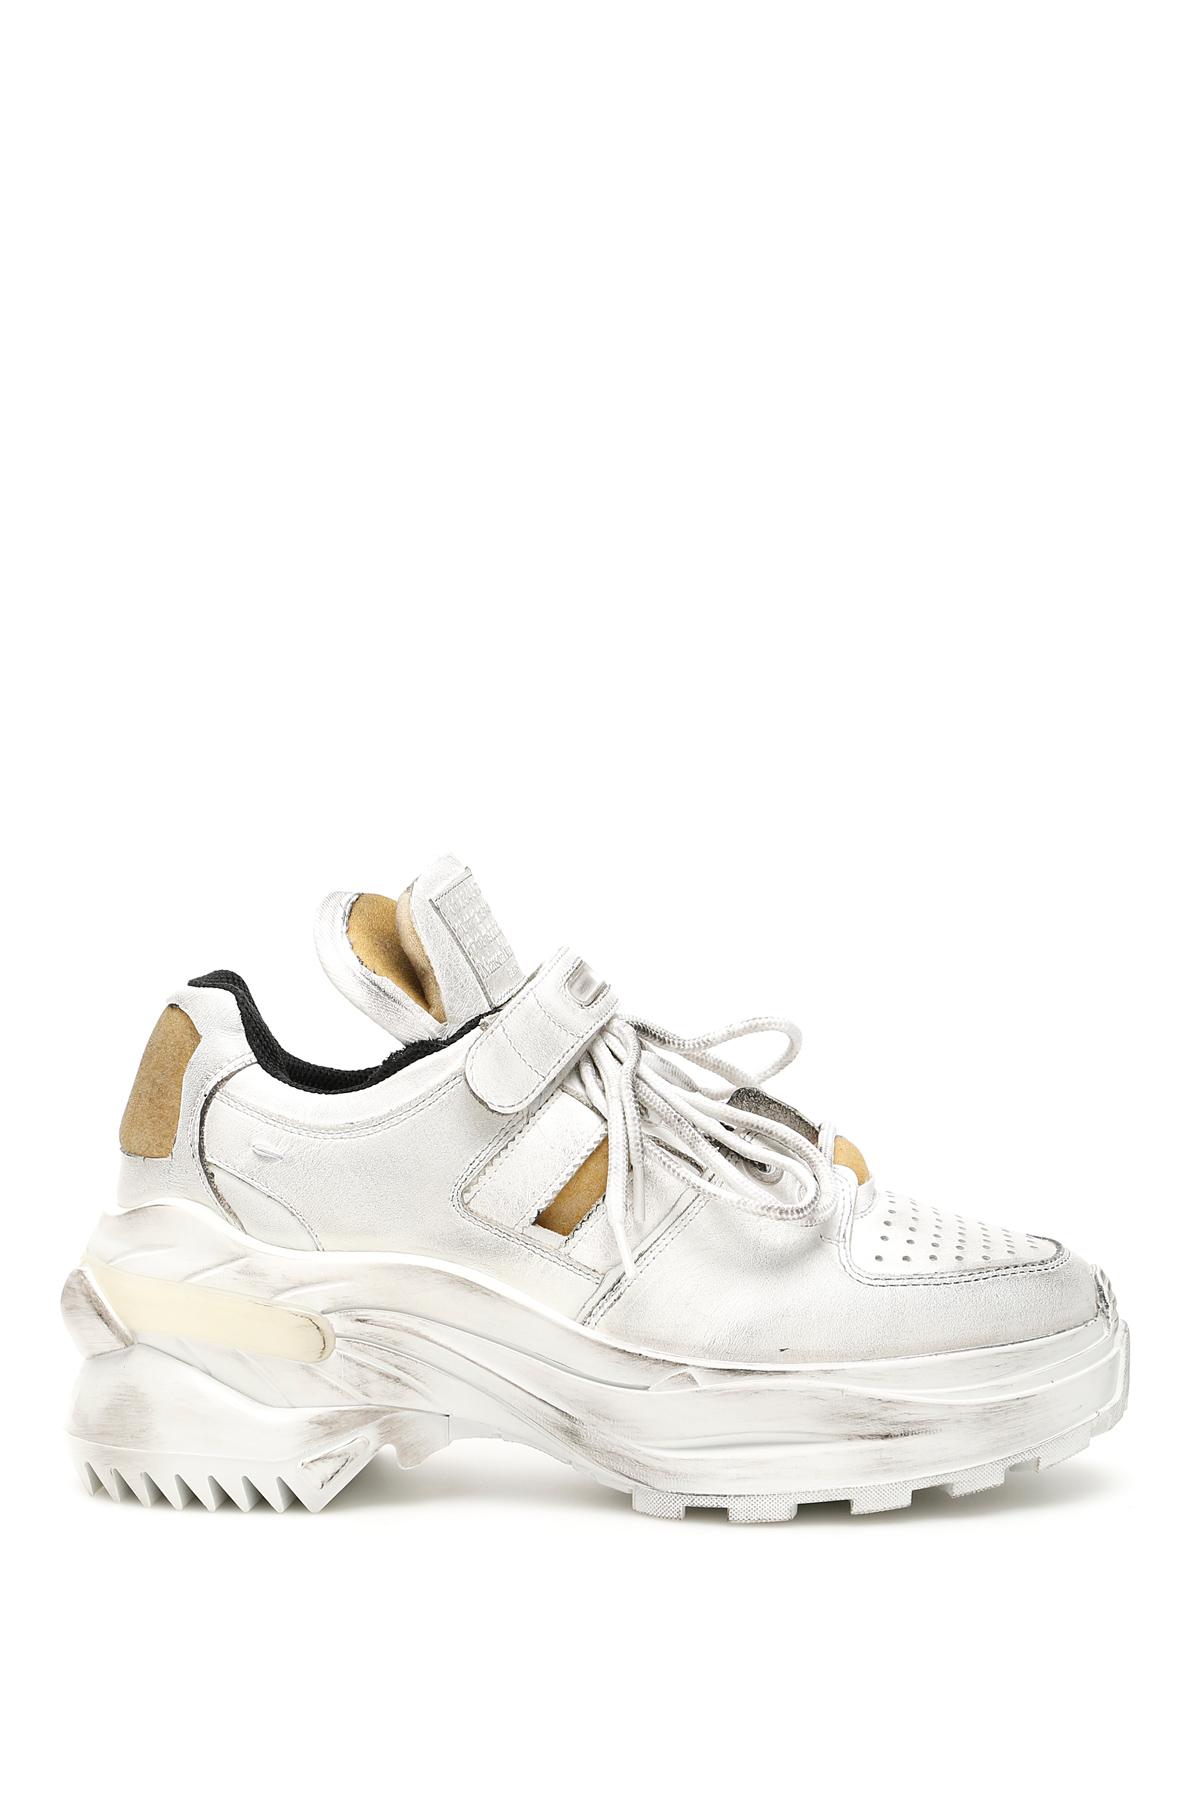 Maison Margiela Retro Fit Sneakers in White - Save 24% - Lyst